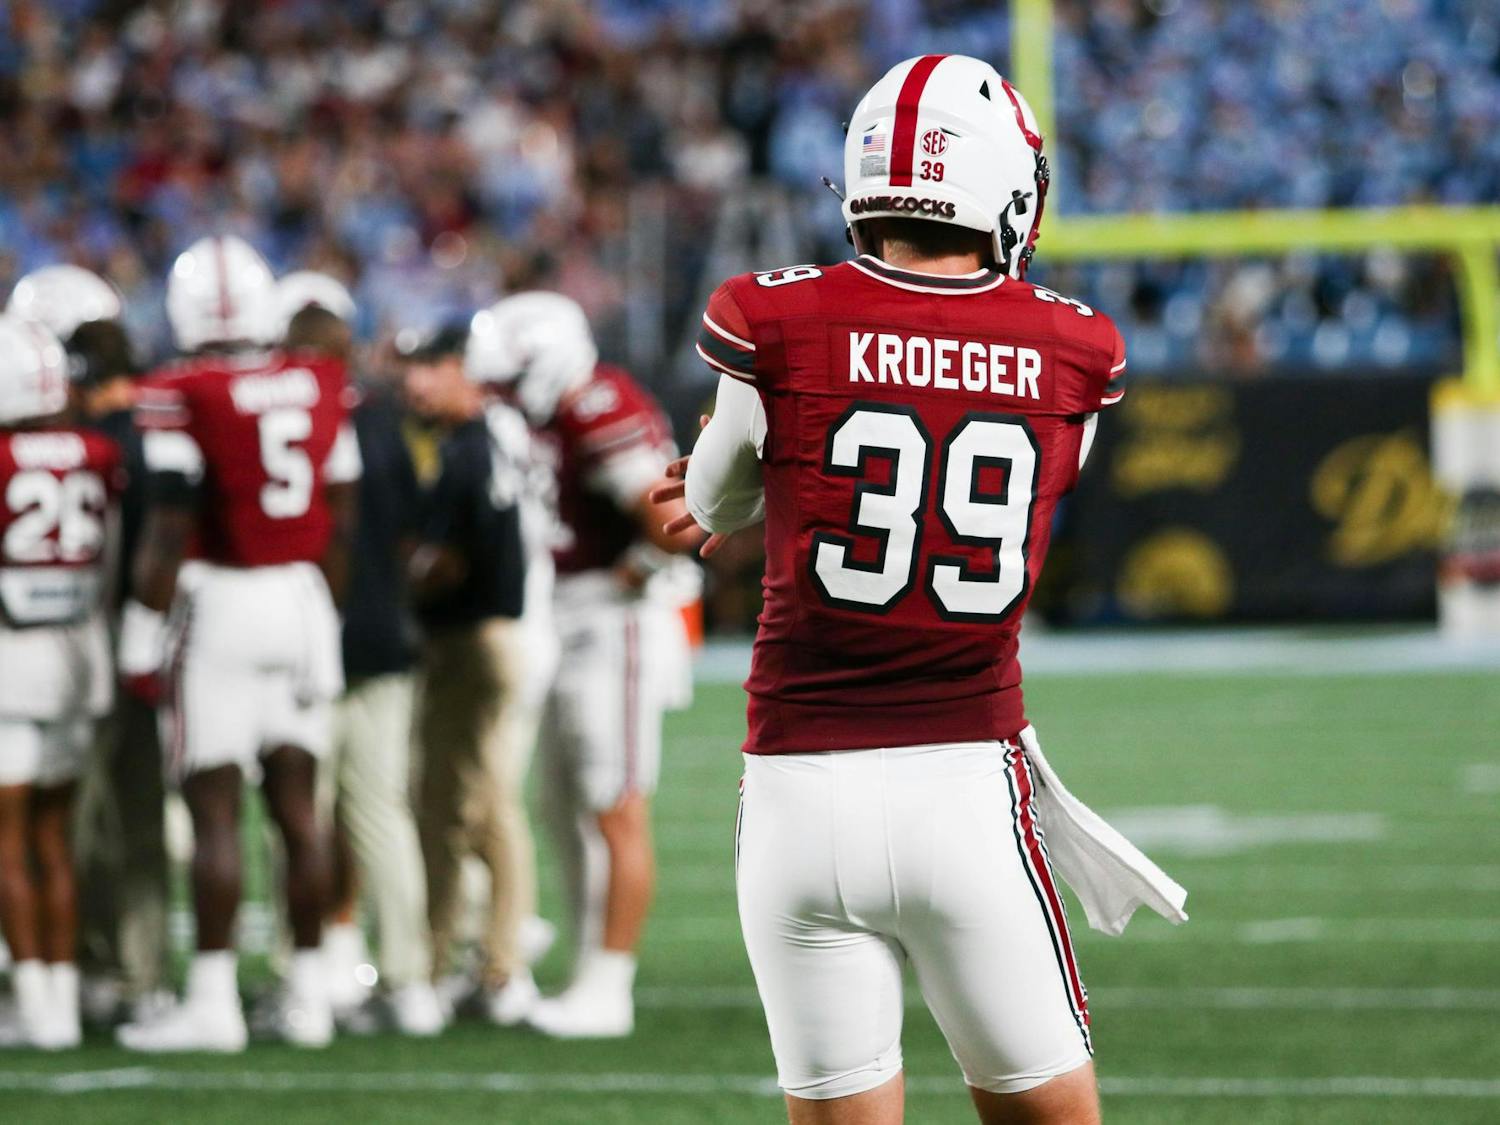 Senior punter Kai Kroeger practices on the sidelines during a timeout. Kroeger had five punts with an average of 48.4 yards during the Gamecocks' matchup against the Tar Heels.